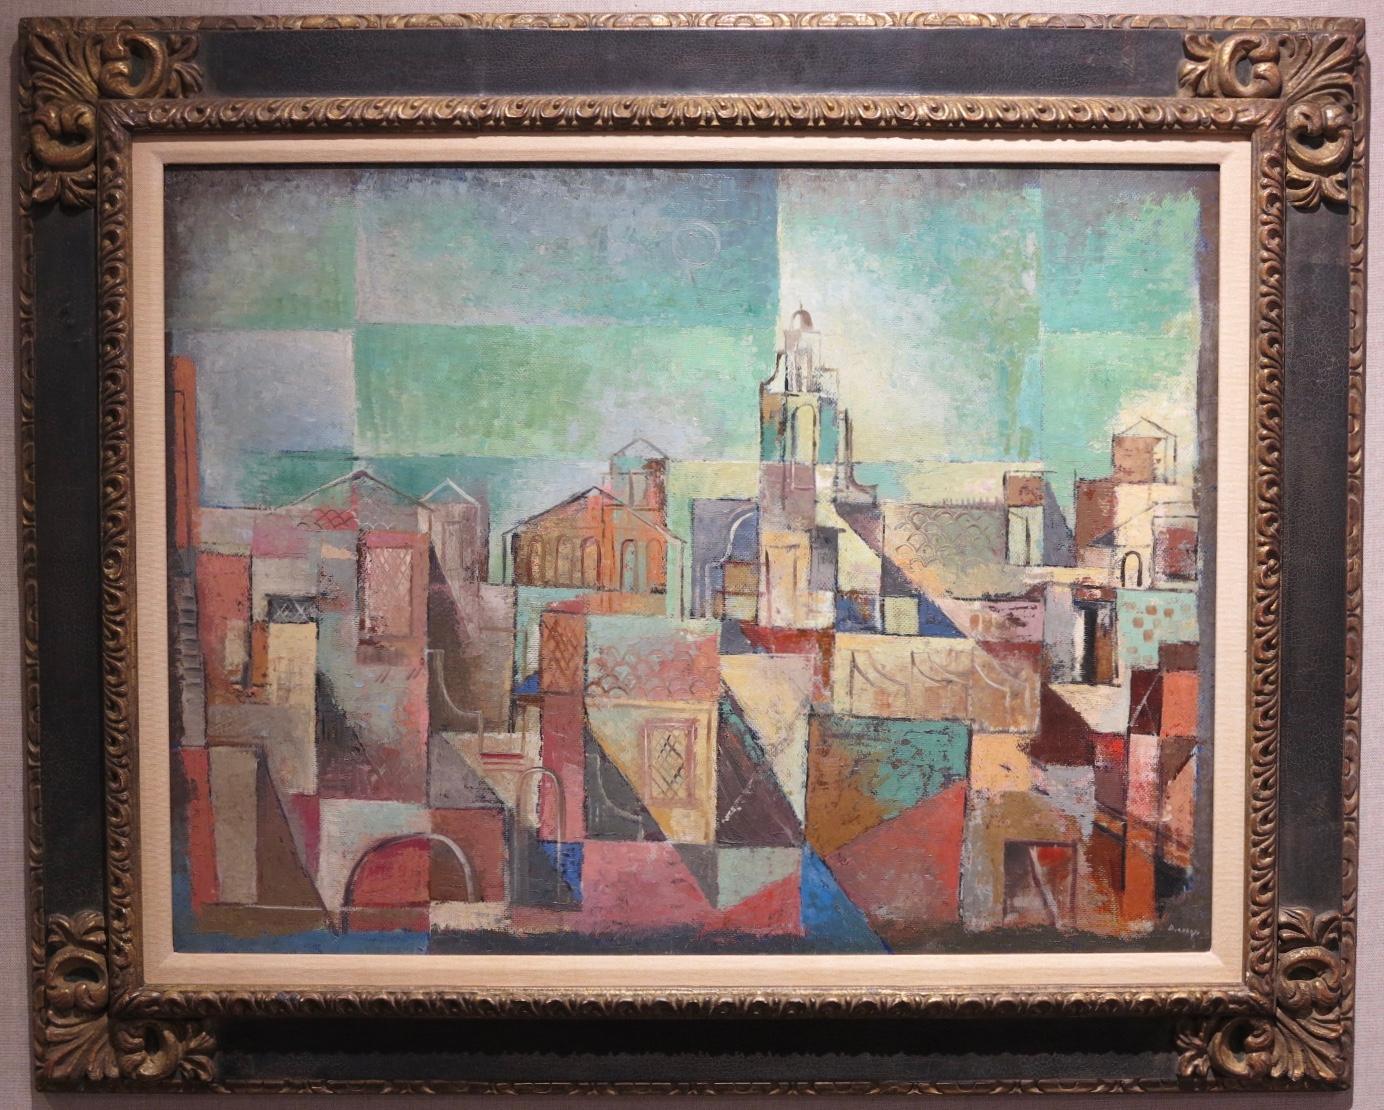 Italian City (Cubist cityscape) - Gray Landscape Painting by Karl Drerup